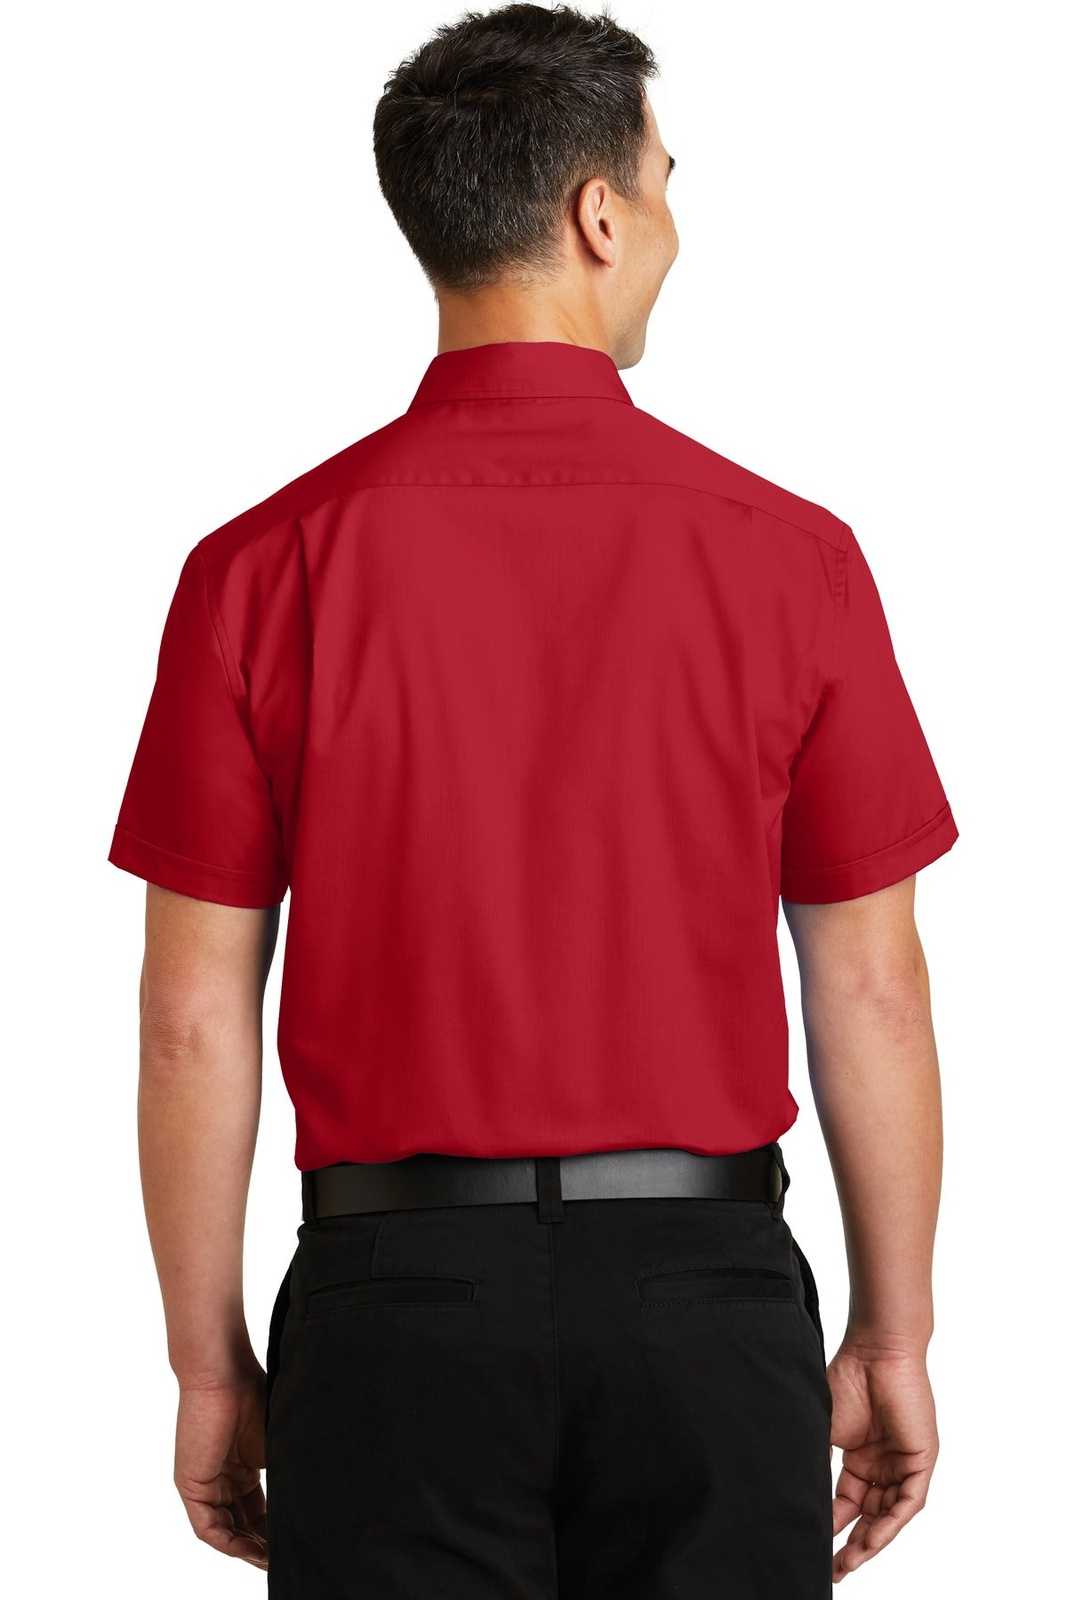 Port Authority S664 Short Sleeve Superpro Twill Shirt - Rich Red - HIT a Double - 1